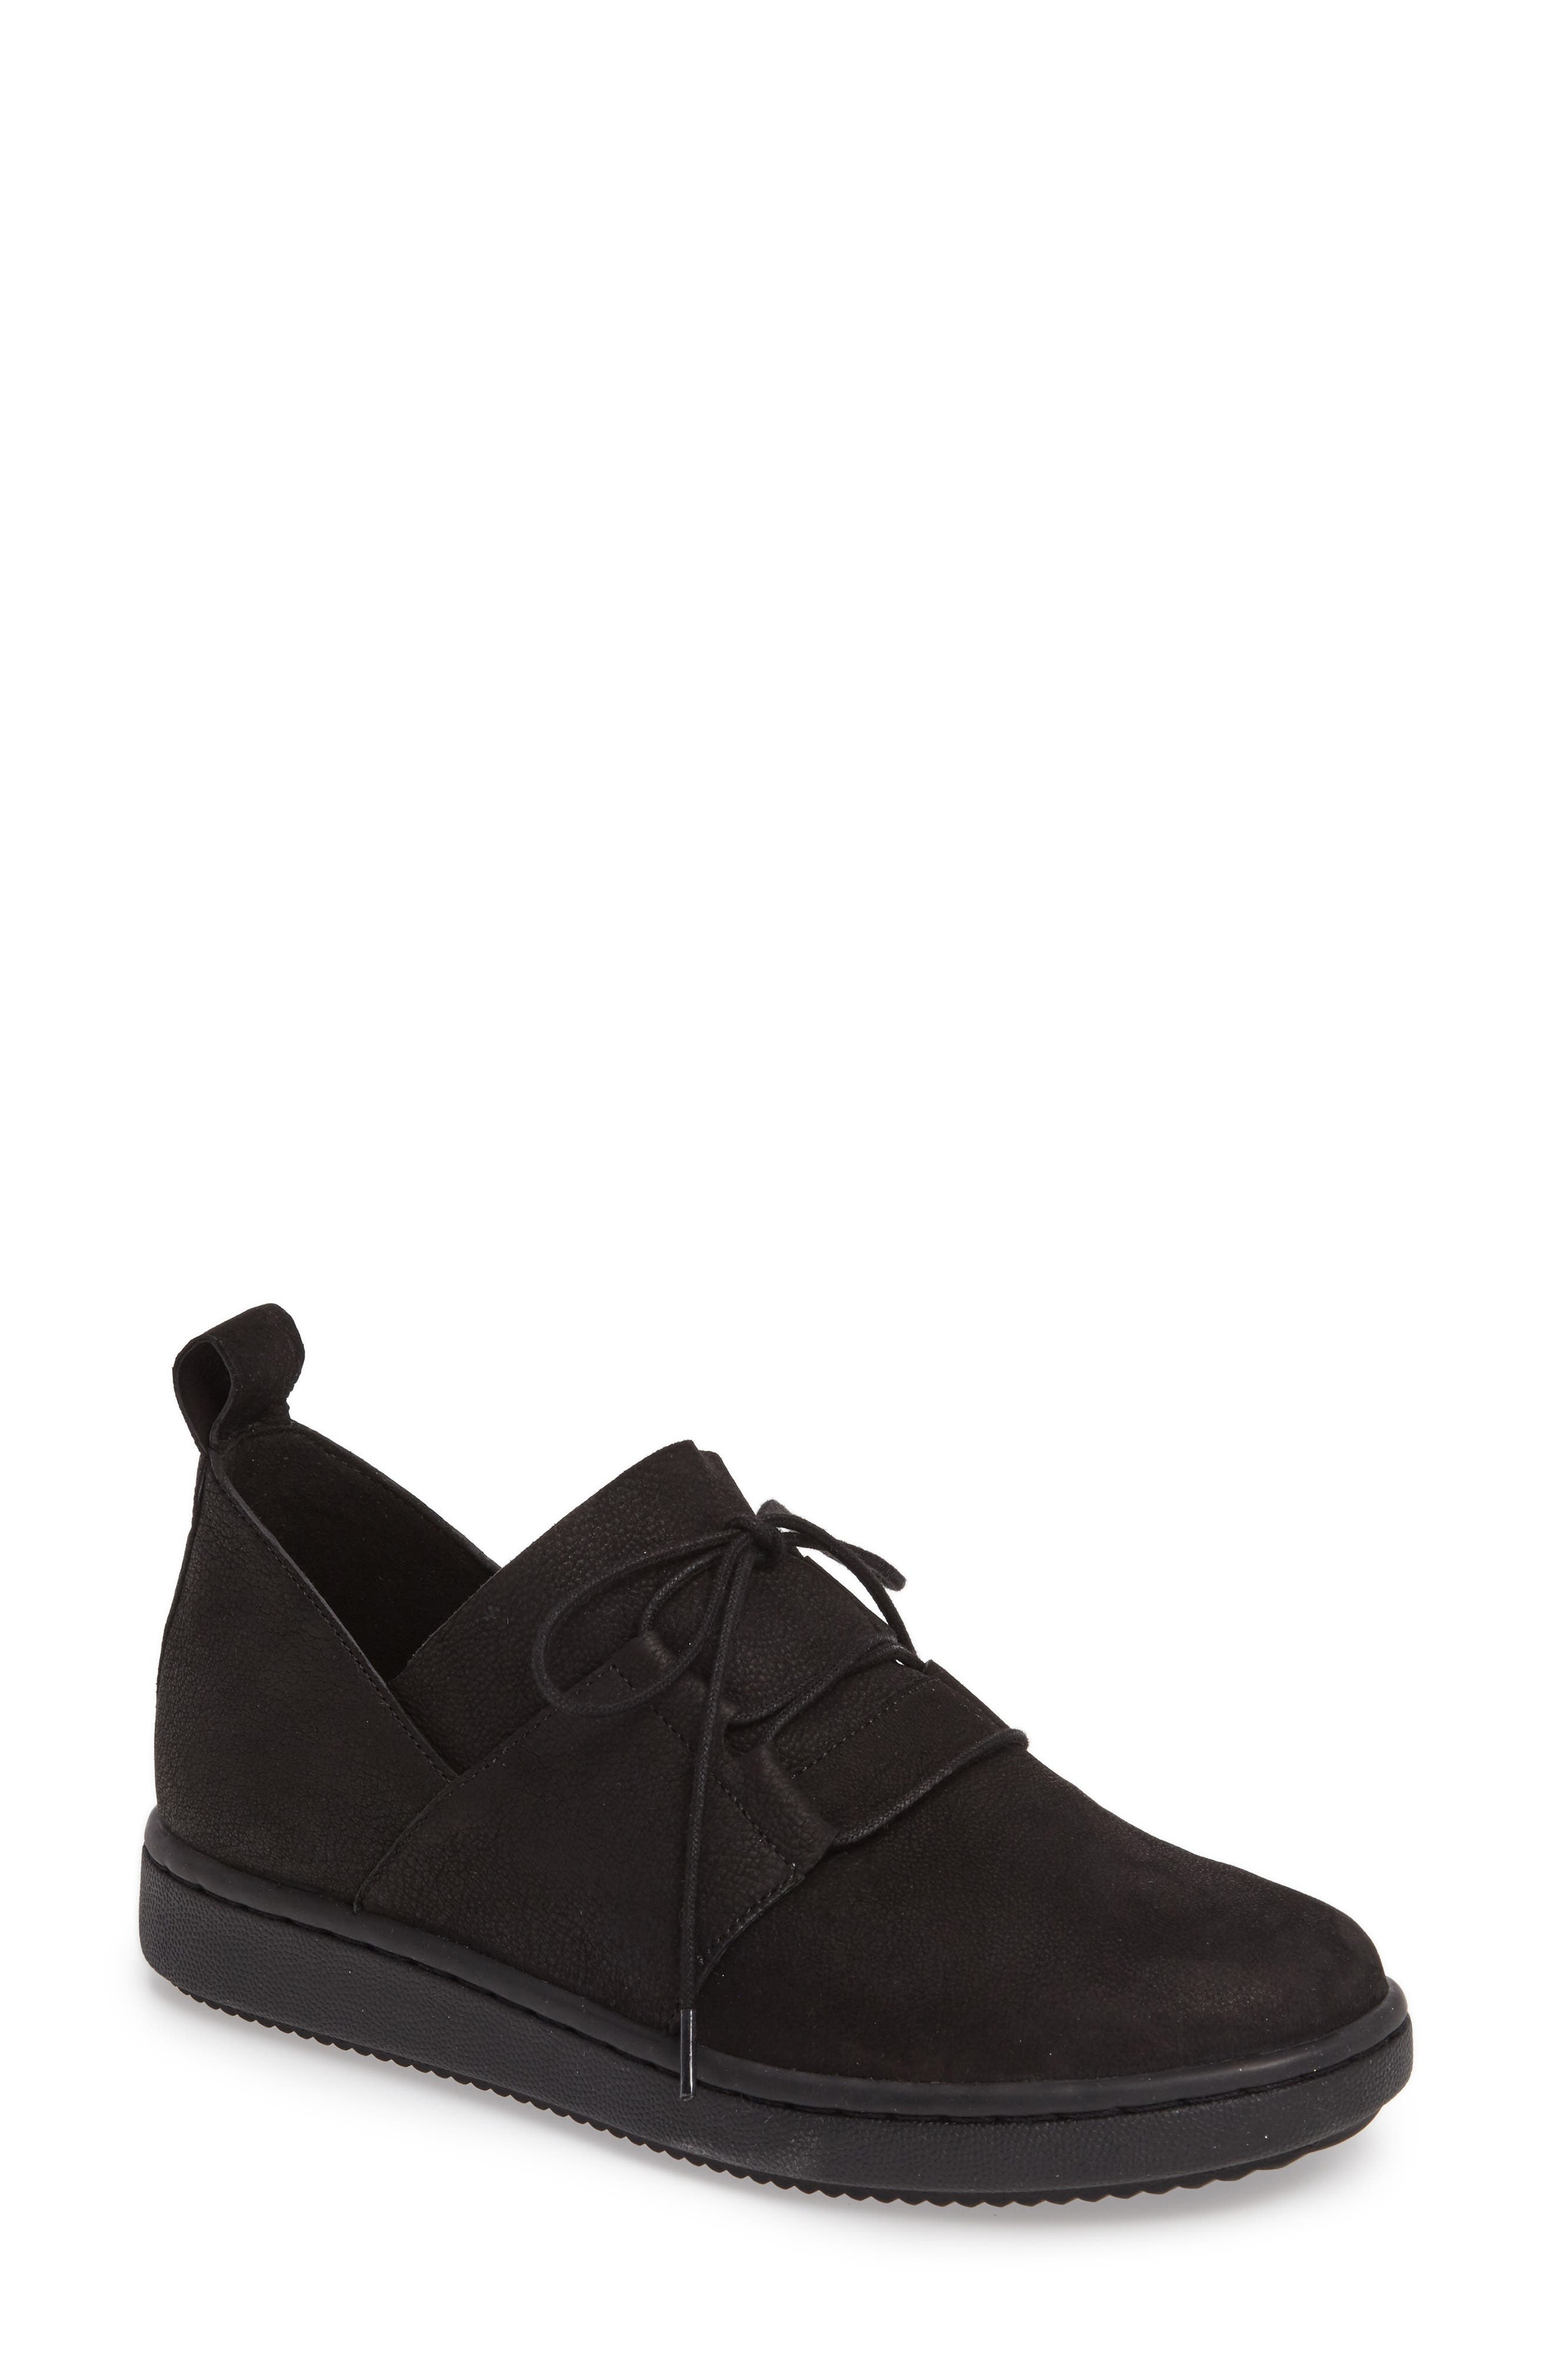 eileen fisher black shoes